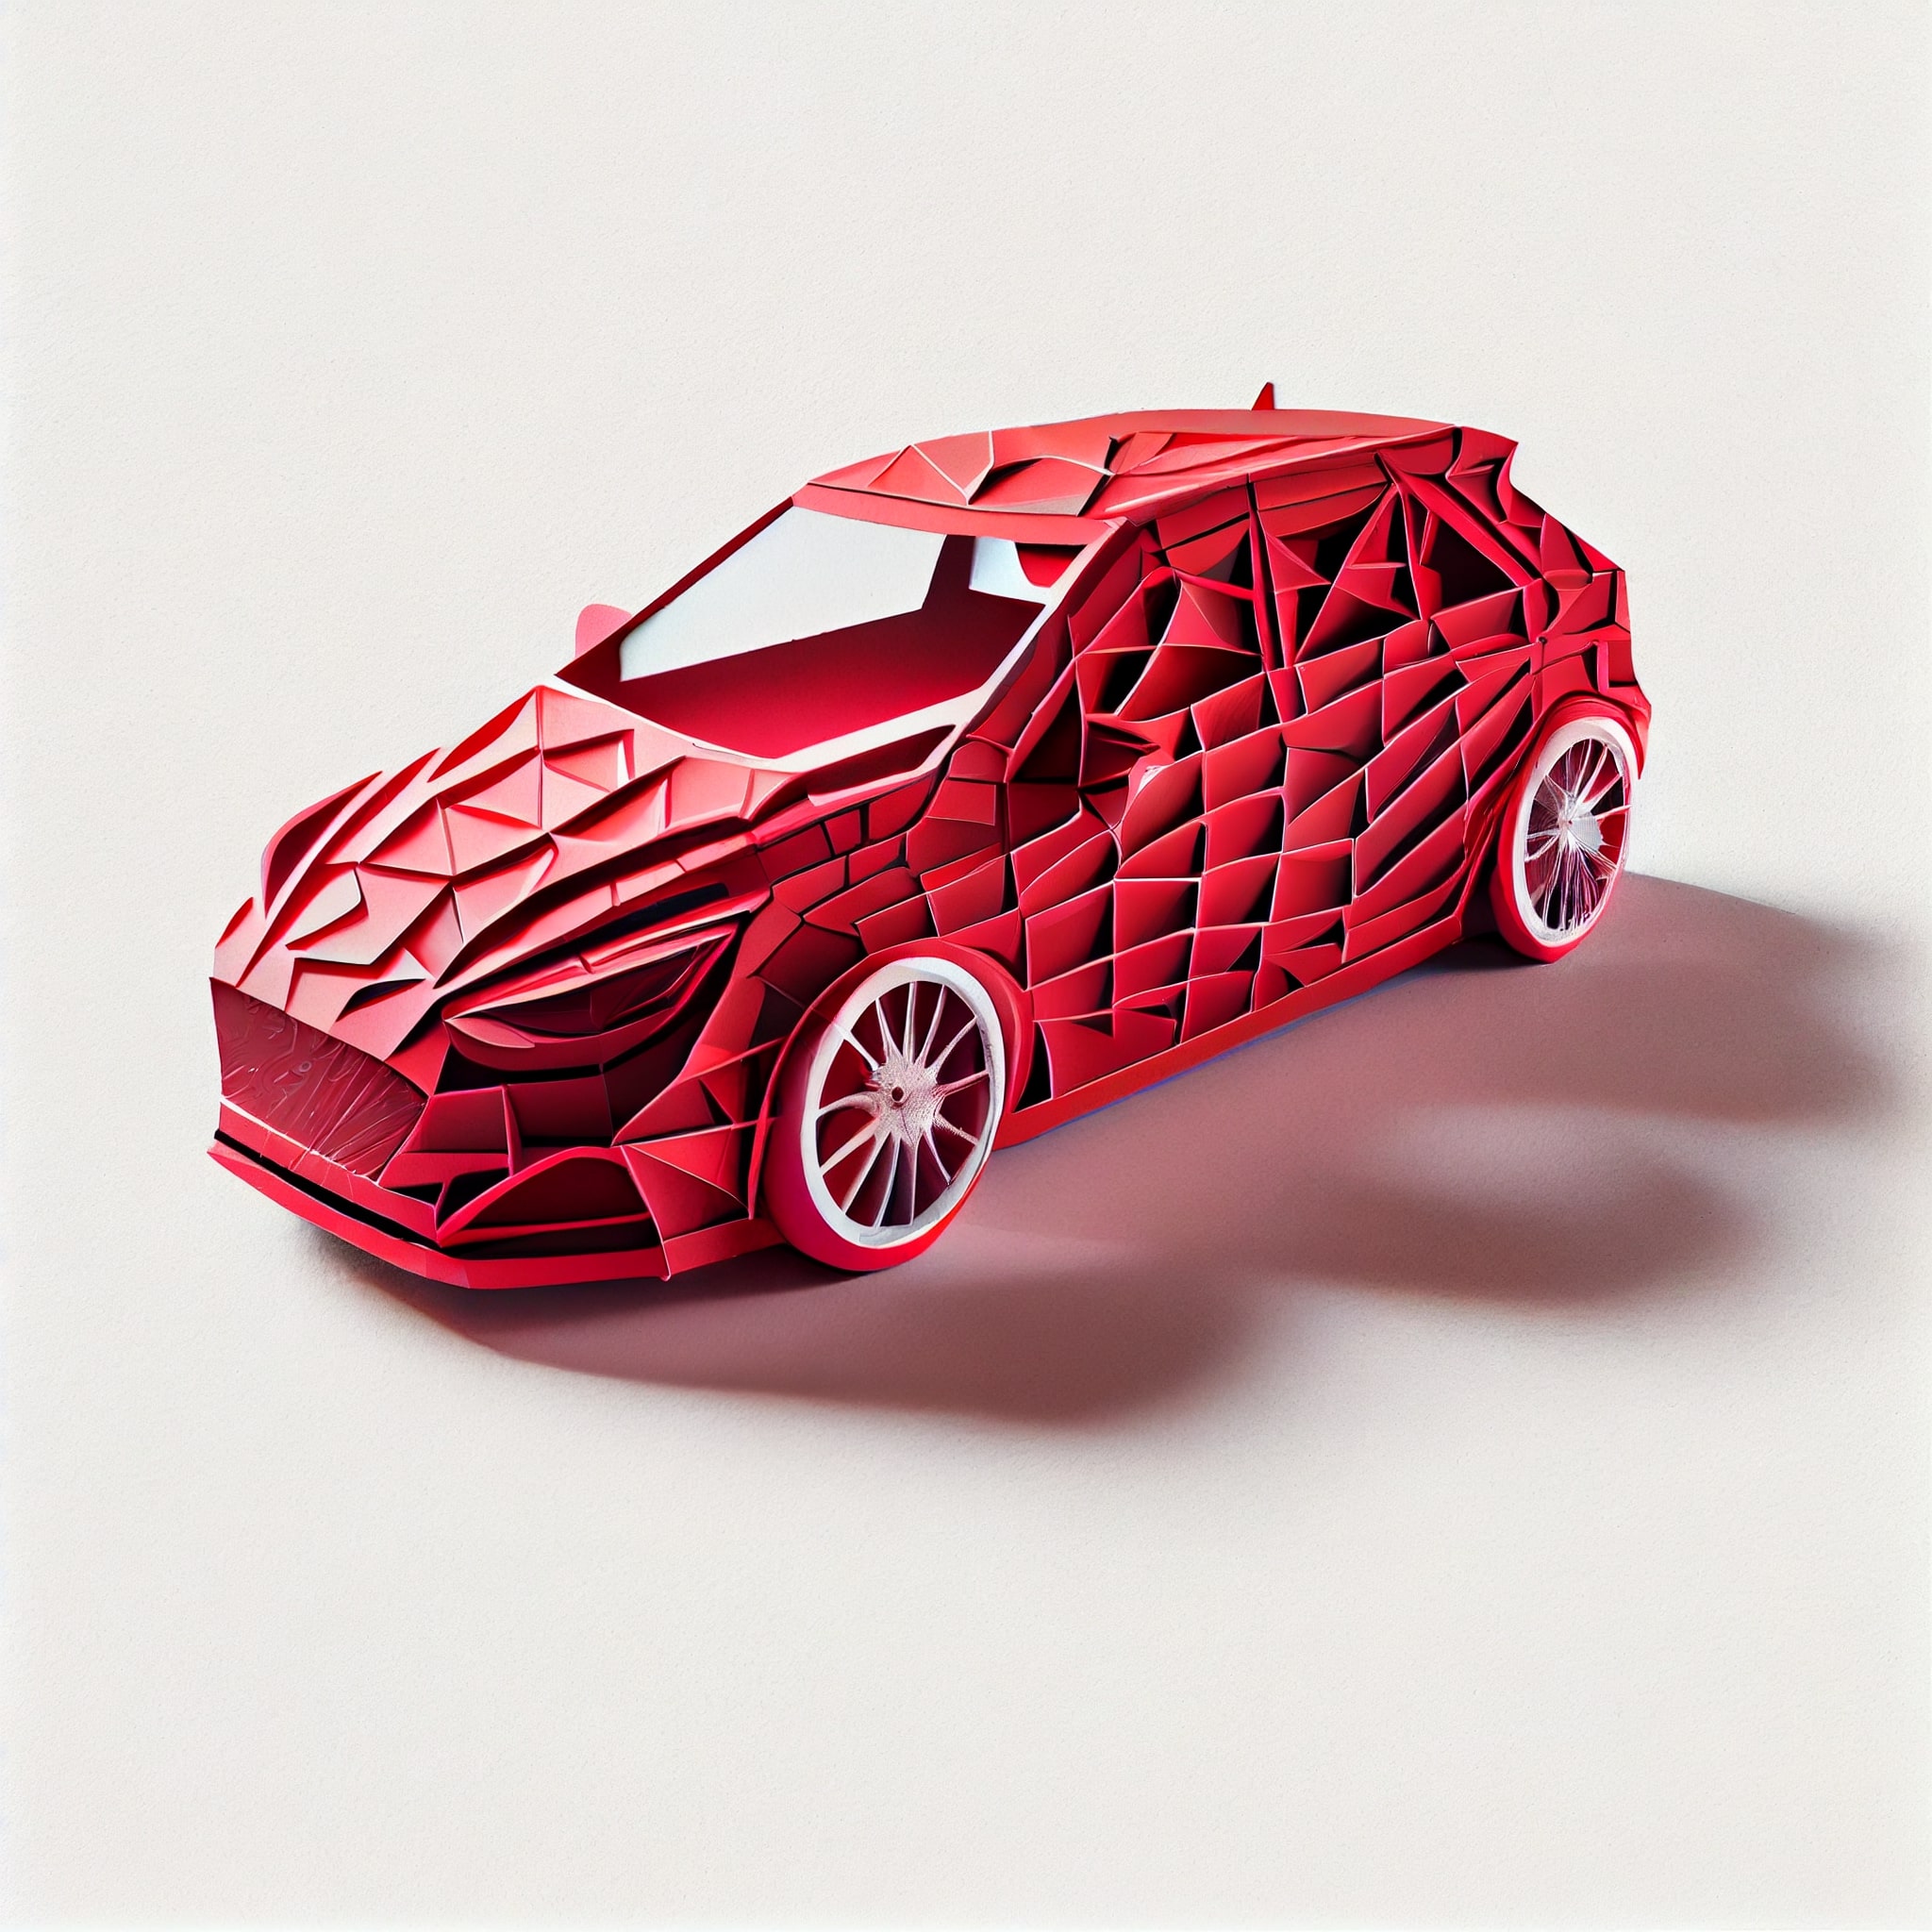 Red paper model of a sports car.